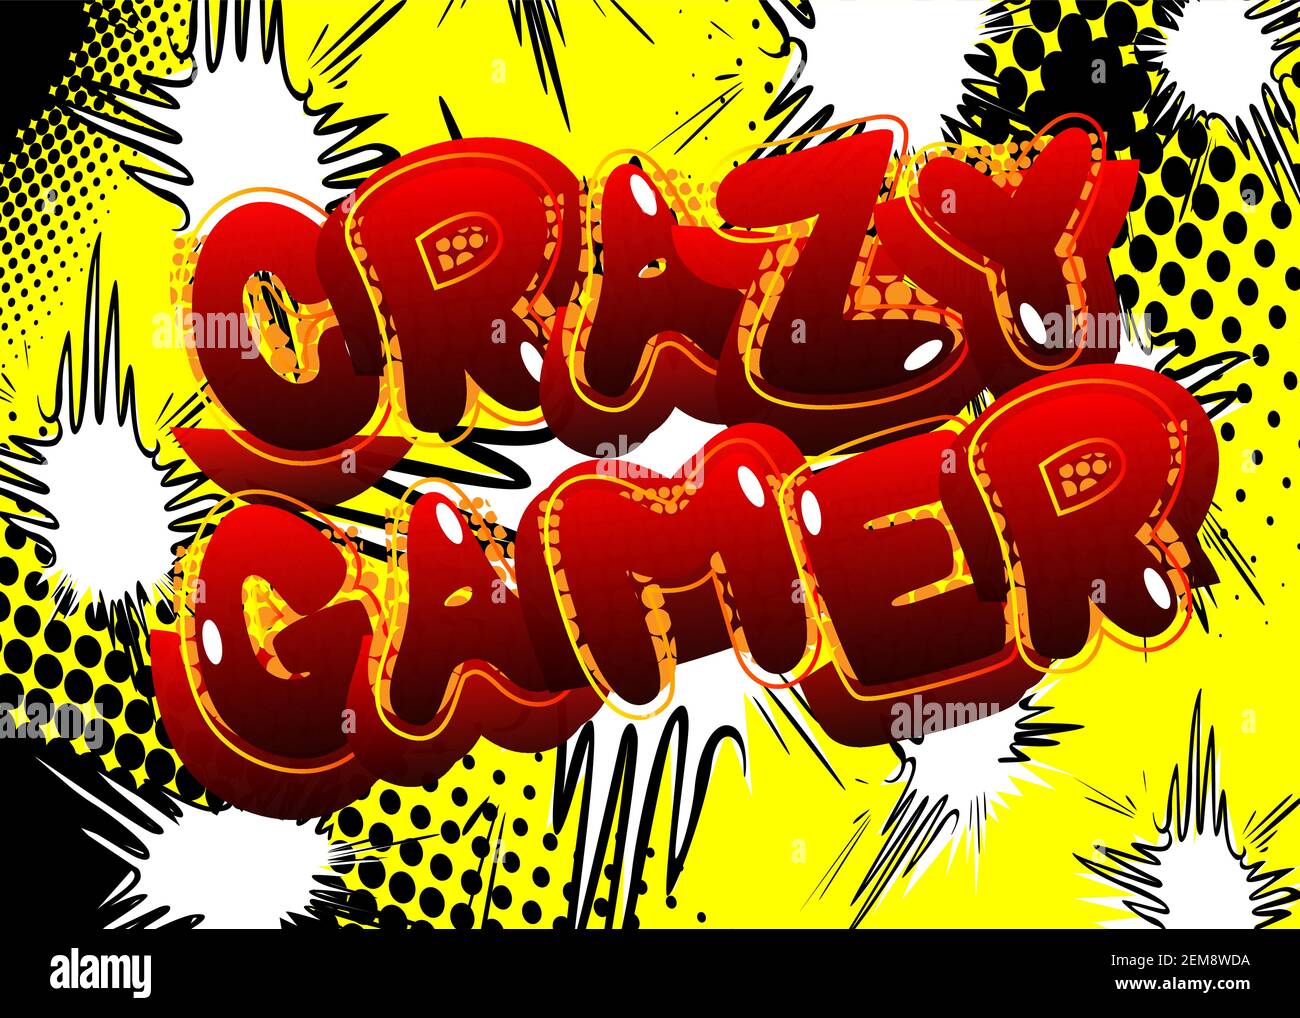 Pc or Console gaming, Gamer related words, quote on Comic book style background. Poster, banner, template. Cartoon explosion expression. Vector illust Stock Vector